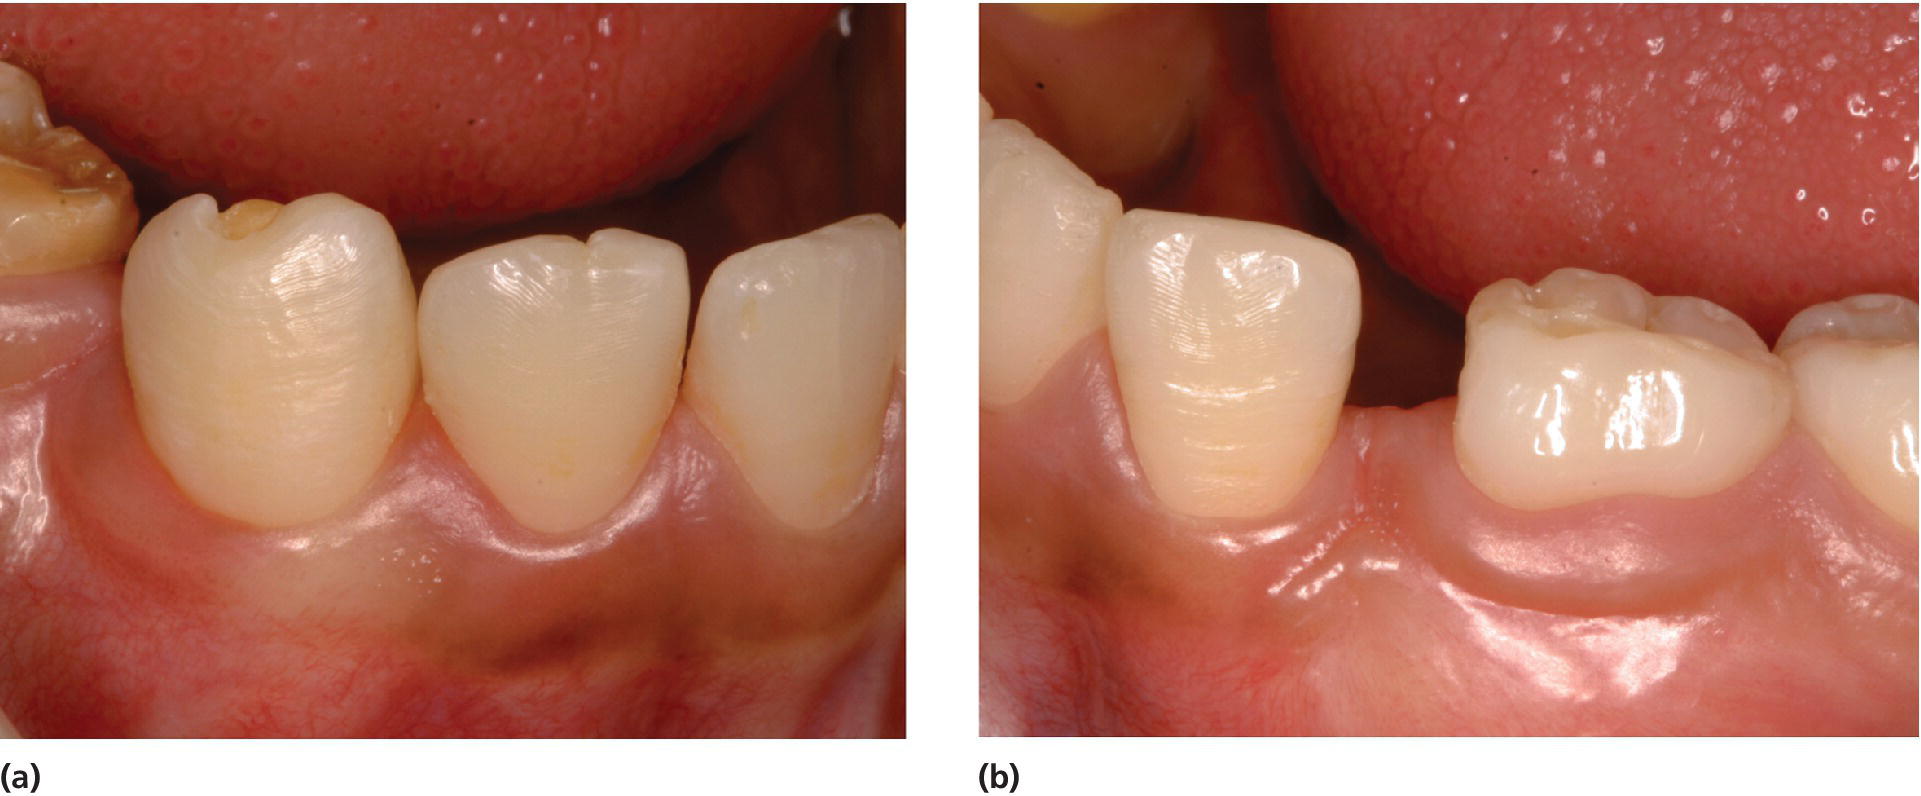 2 Photos displaying hypoplasia with exposure of dentin of the right lower permanent canine (left) and absence of the left lower permanent canine due to removal of the tooth germ (right).